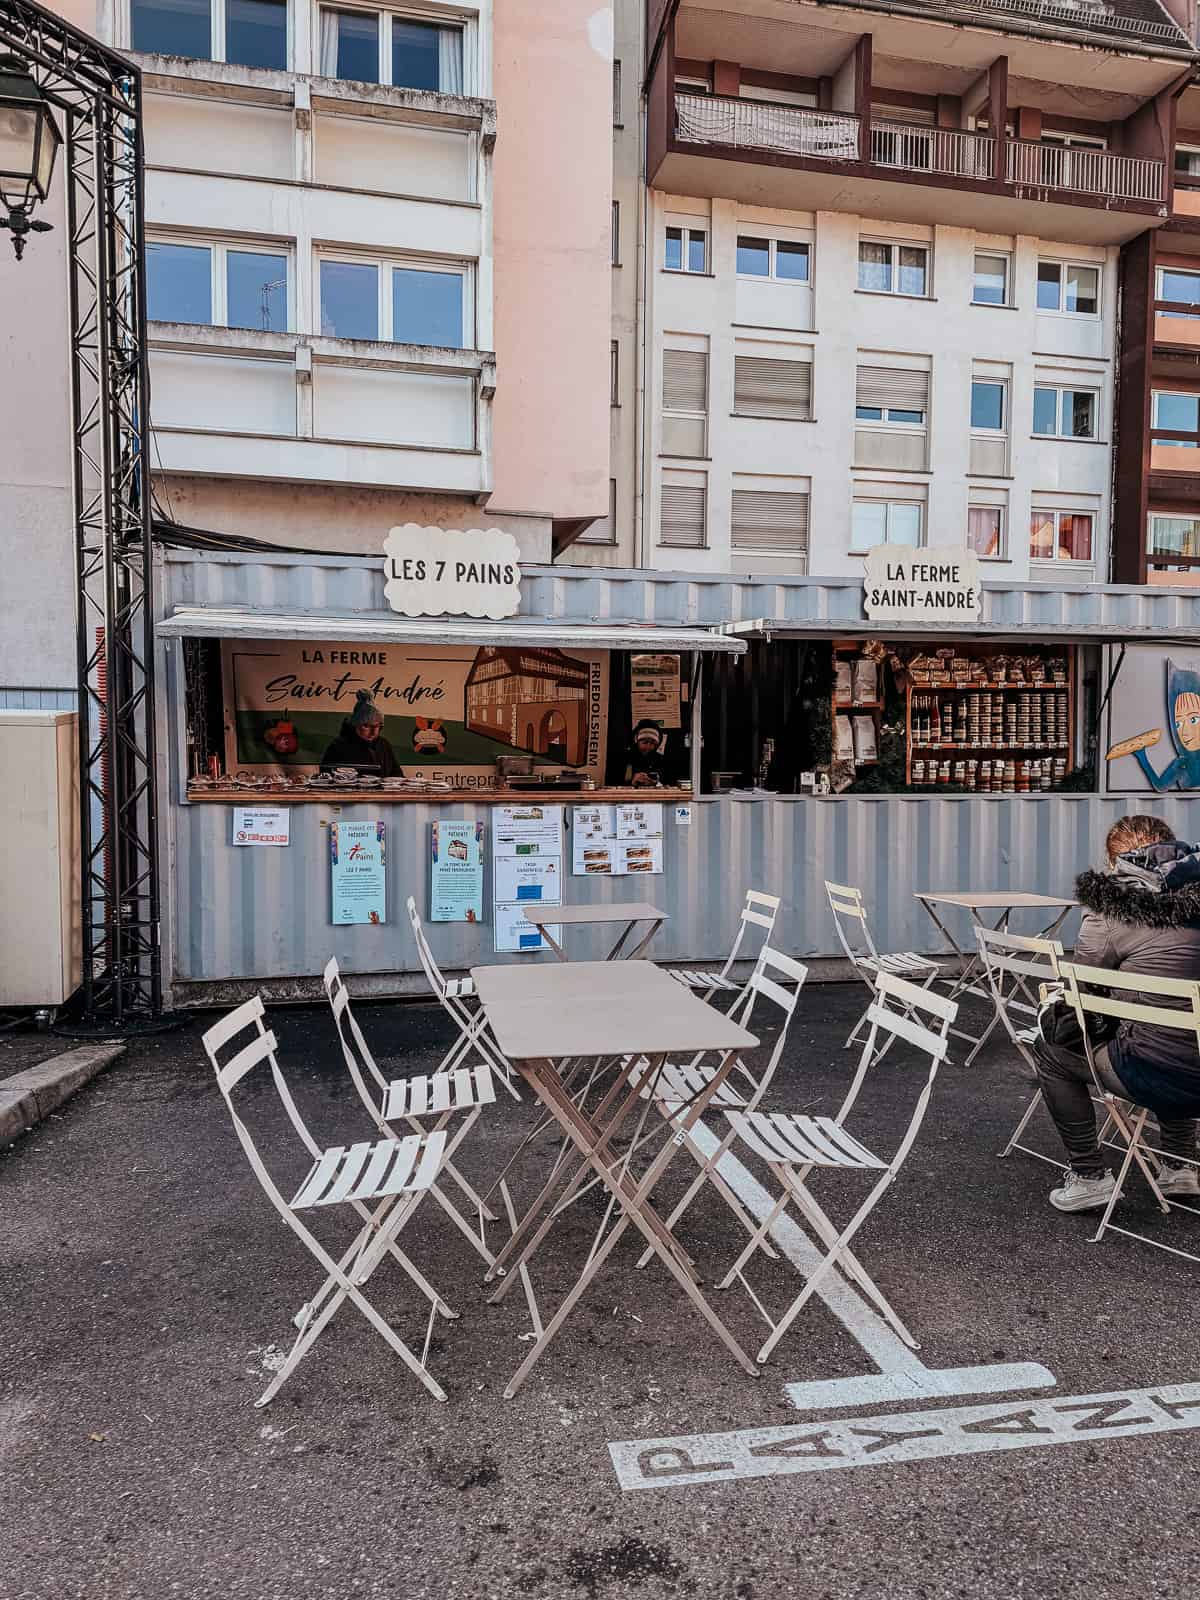 A casual outdoor seating arrangement with metal chairs and tables in front of a small food stand, 'Les 7 Pains', set against an urban building backdrop.